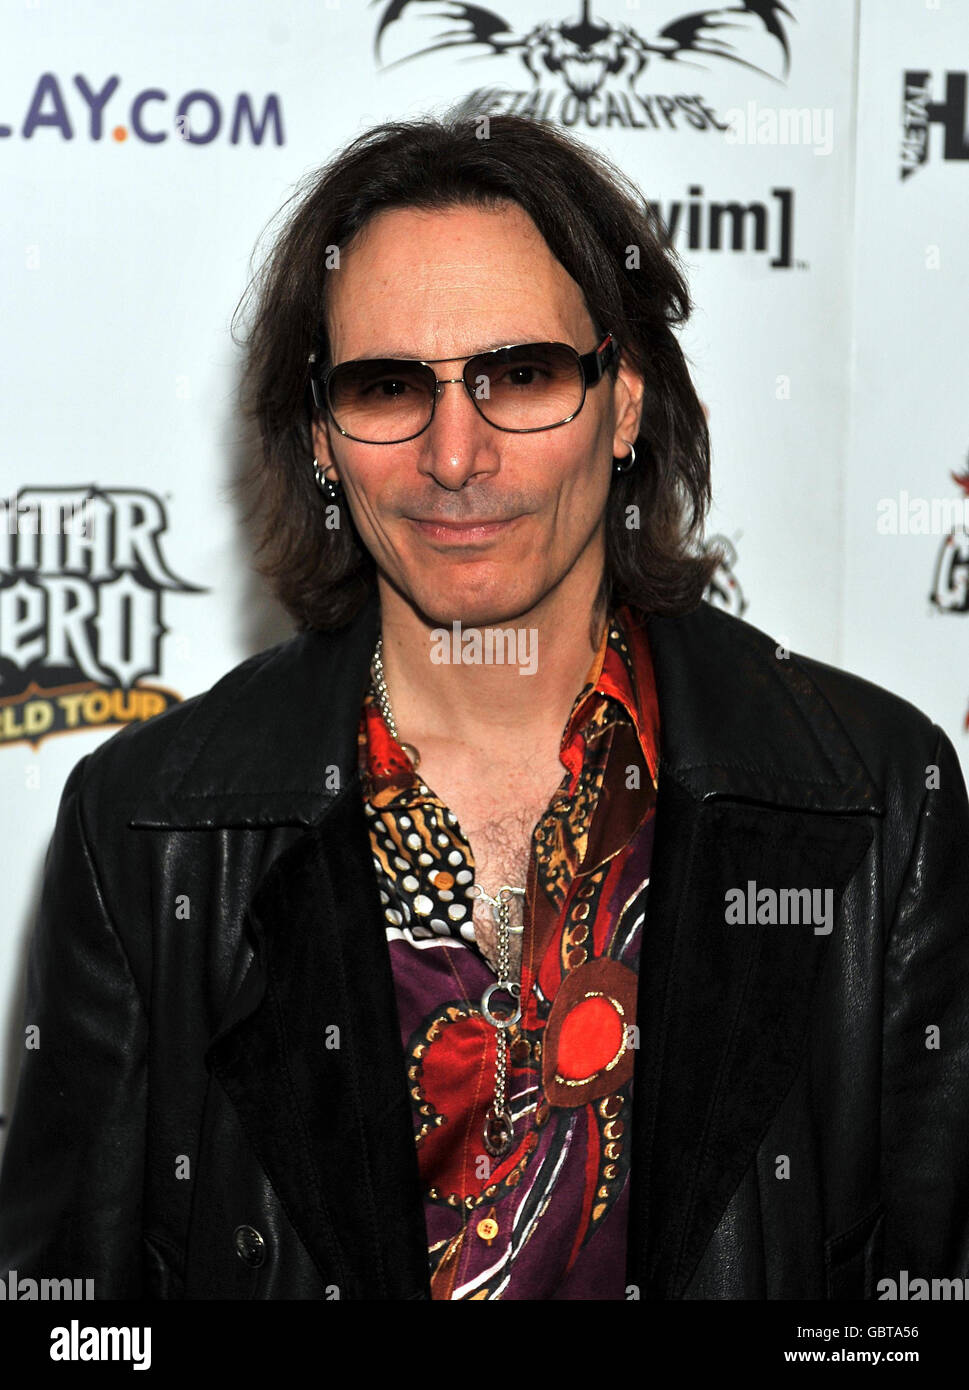 Steve Vai arrives at the Indigo concert venue, for the Metal Hammer Golden Gods awards at the O2 Arena in Greenwich south East London. Stock Photo